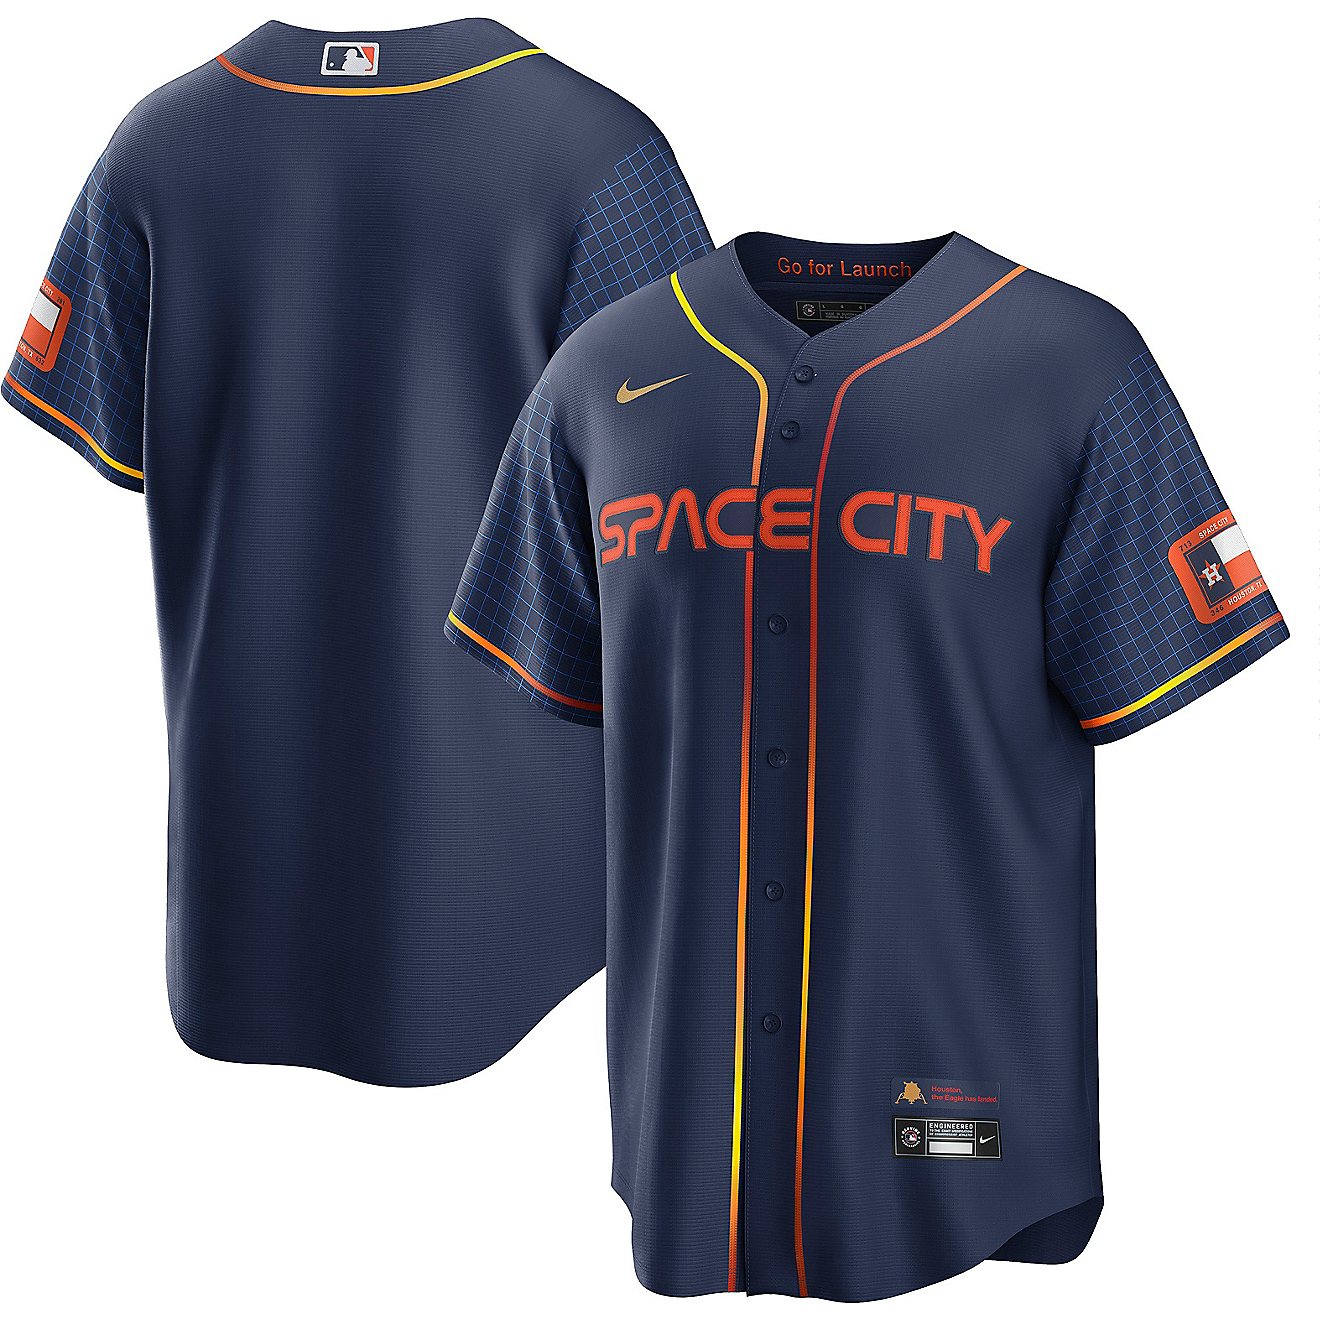 academy astros space city jersey